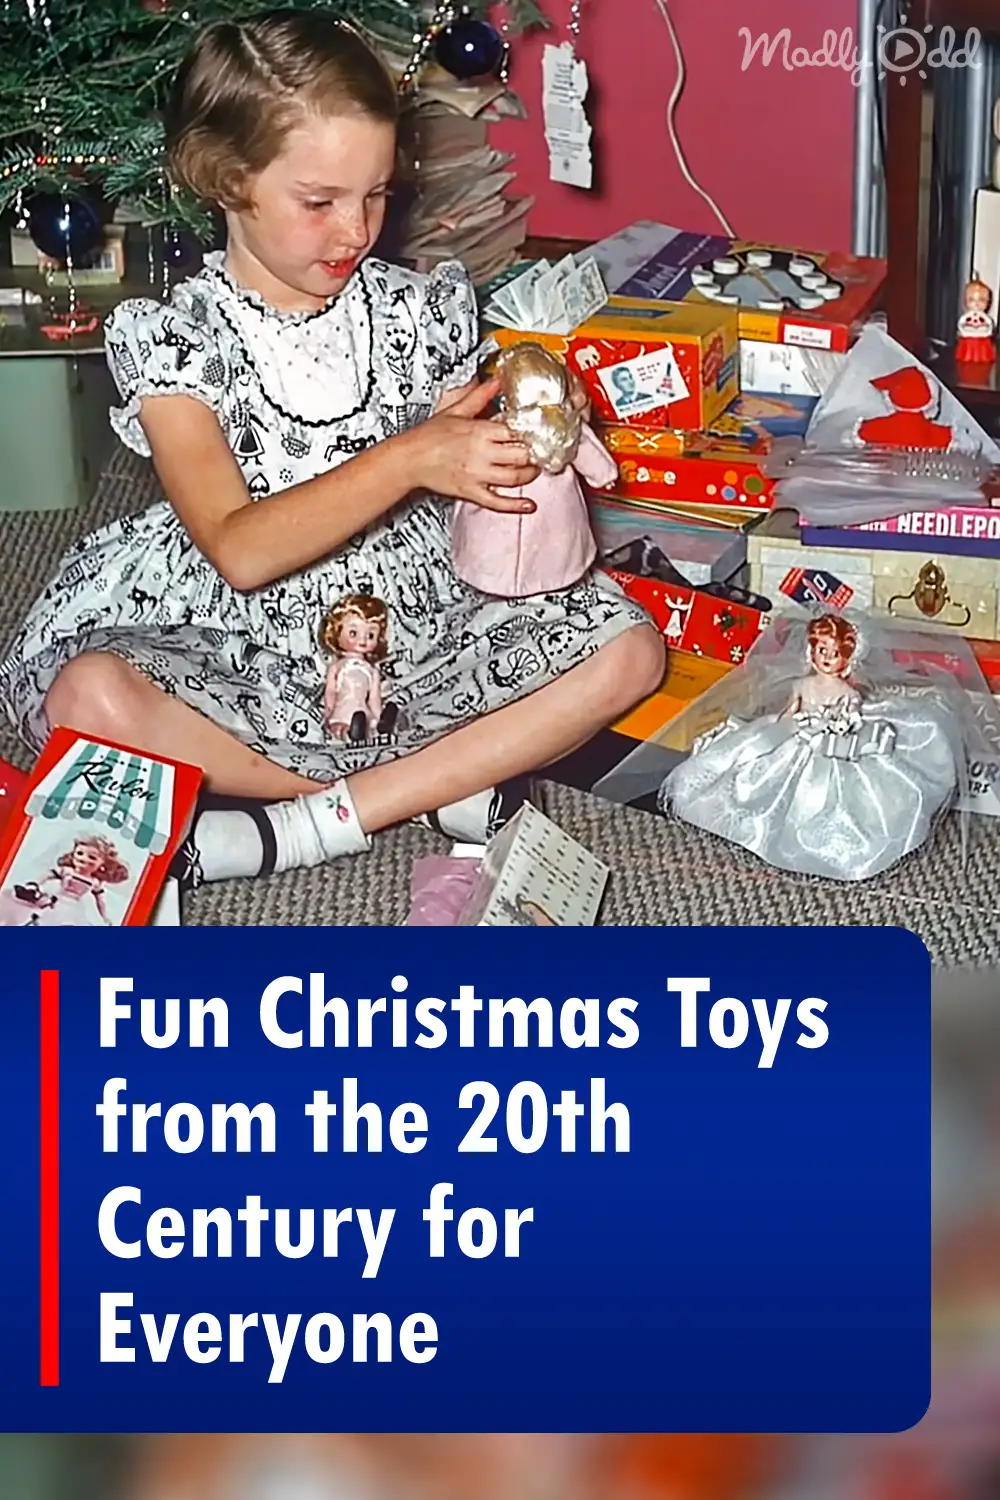 Fun Christmas Toys from the 20th Century for Everyone